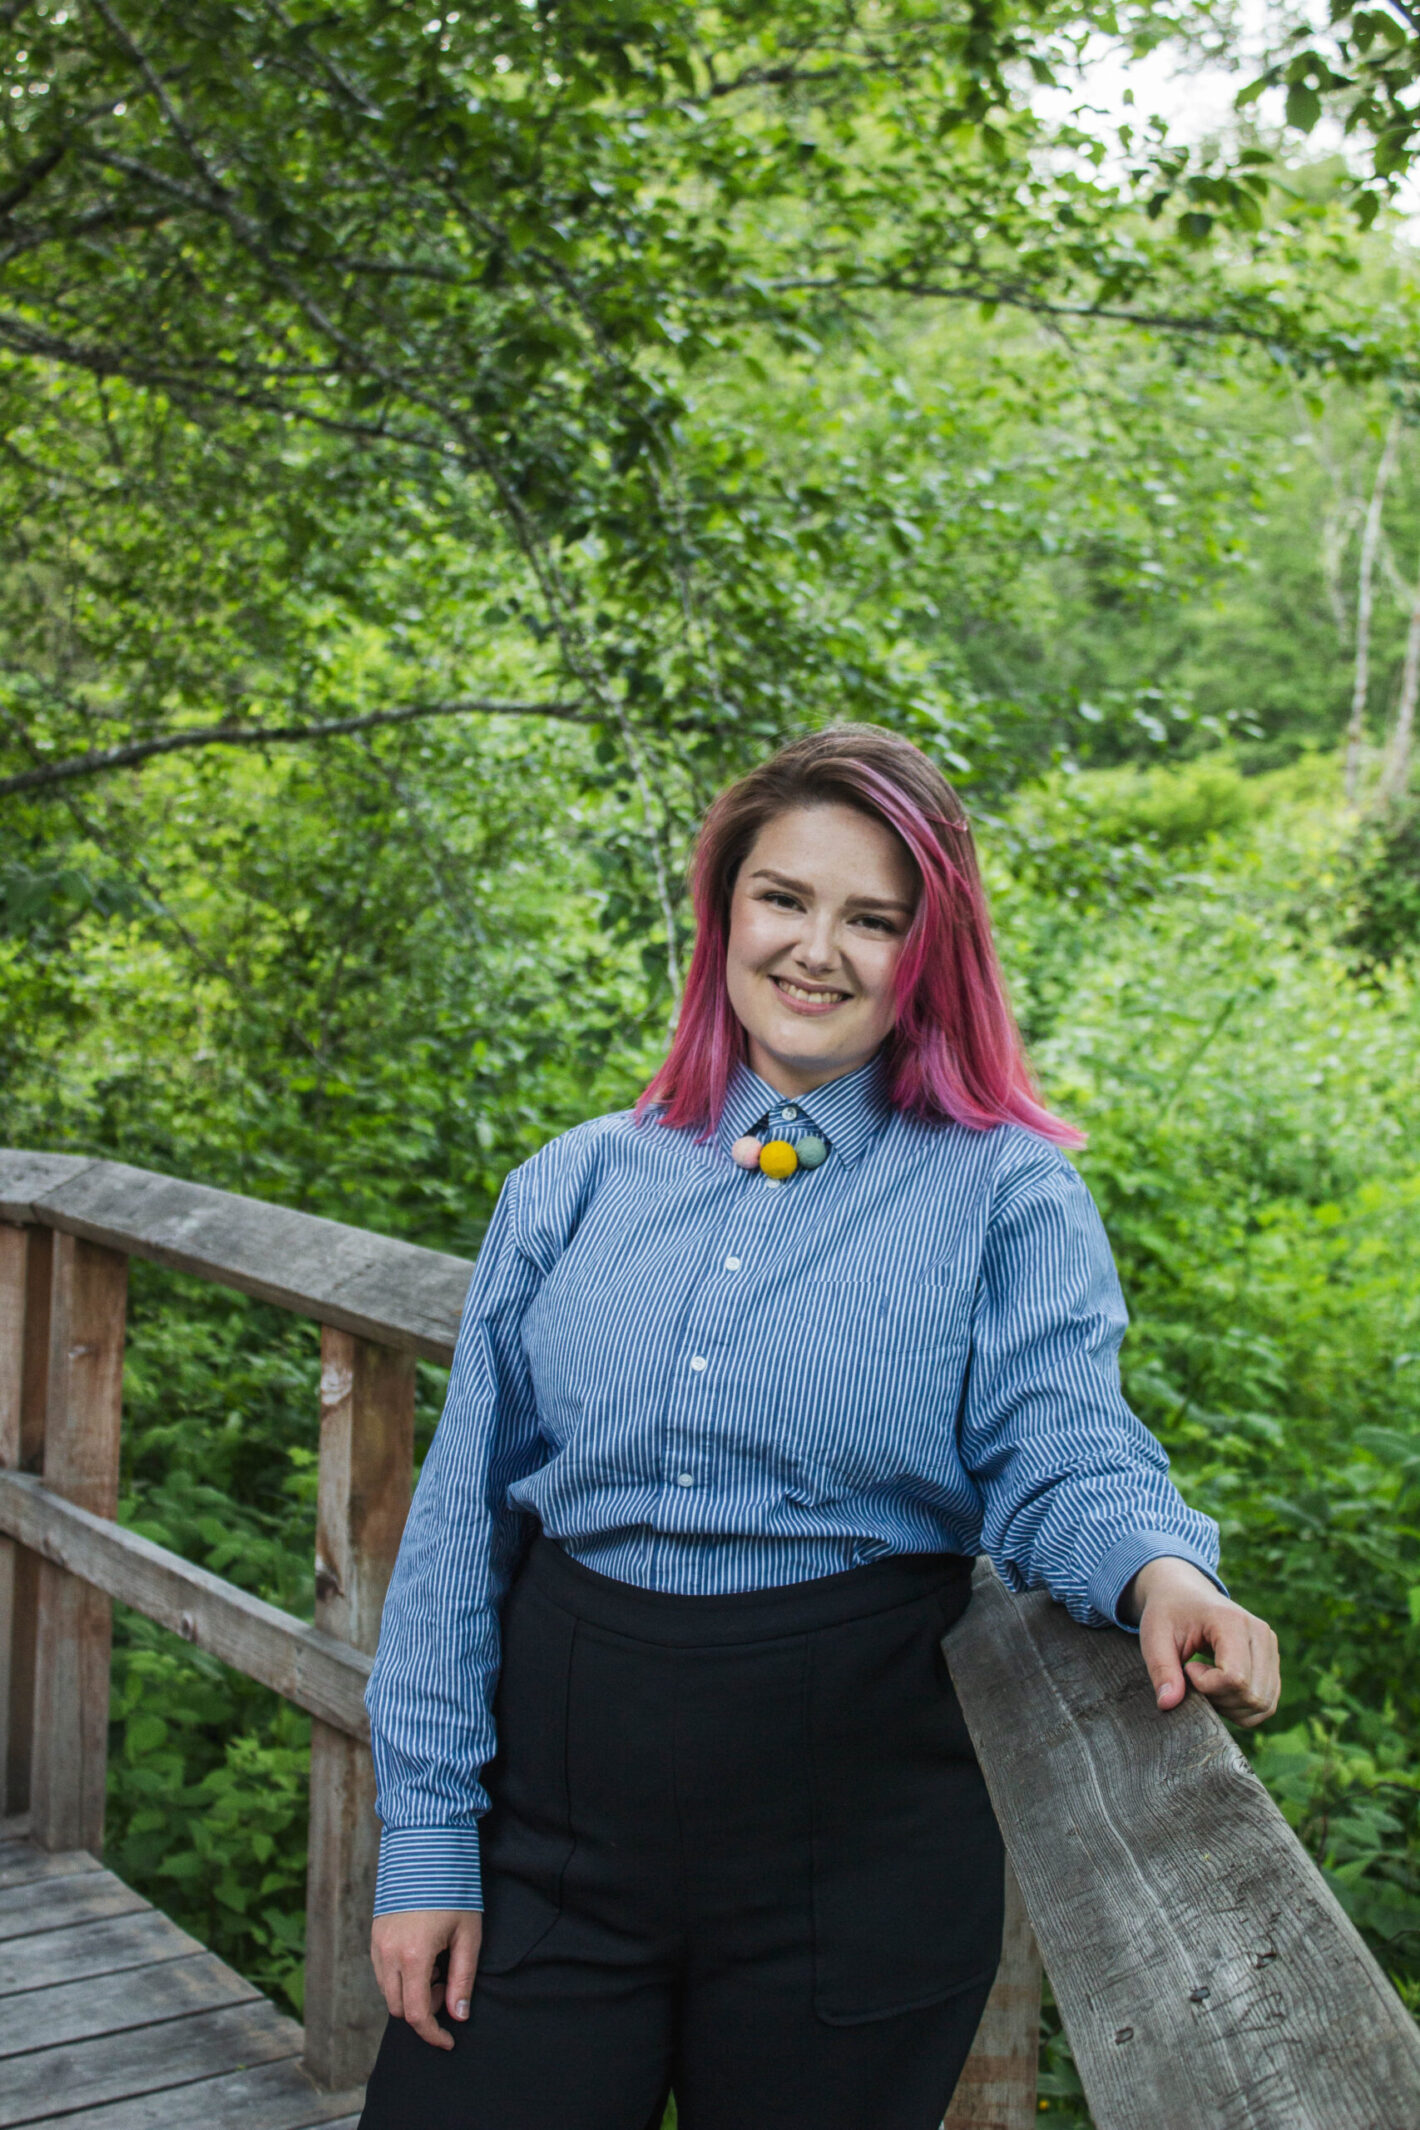 A femme person in a lush forest smiles warmly. They have pink hair and are dressed semi-formally in a blue buttonup dress-shirt, and black high-waisted dress pants.